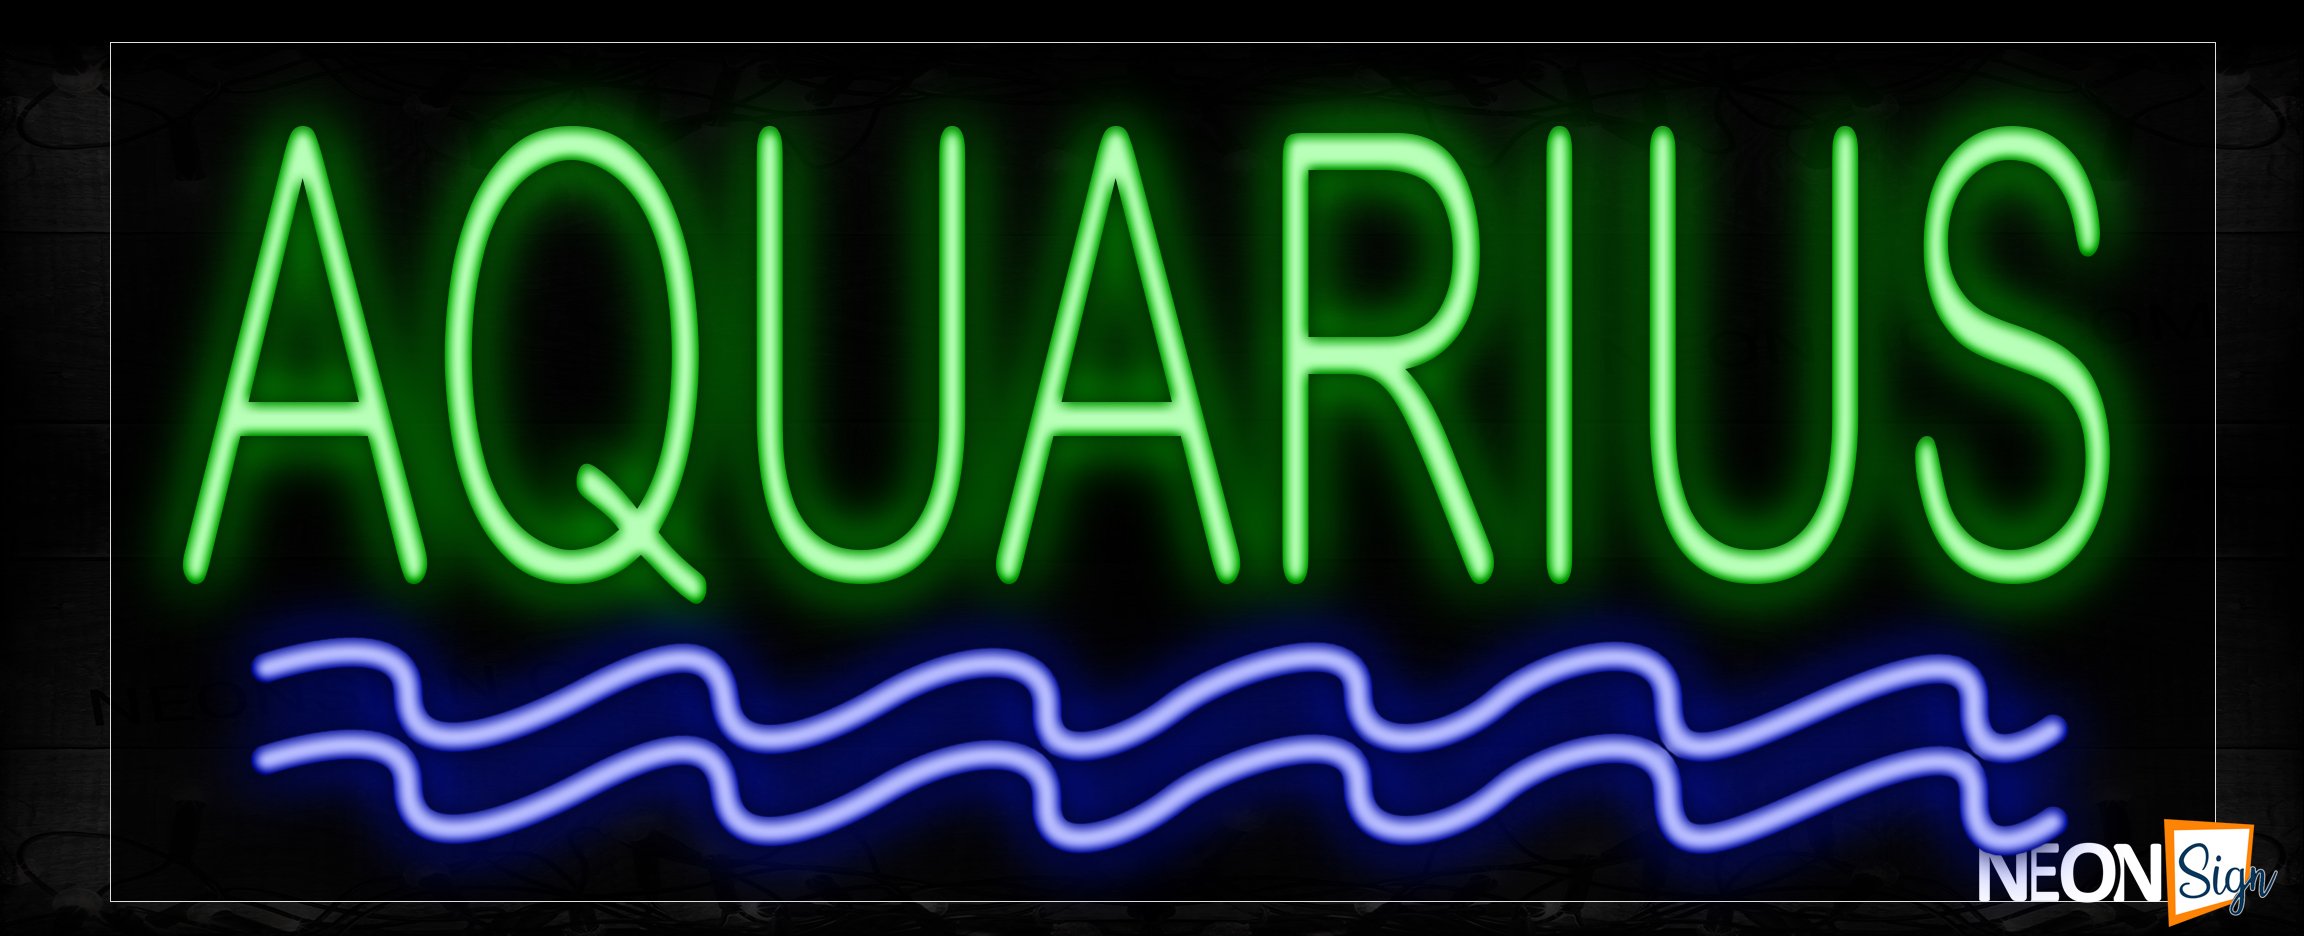 Image of 10206 Aquariums With Wavy Line Neon Sign_13x32 Black Backing